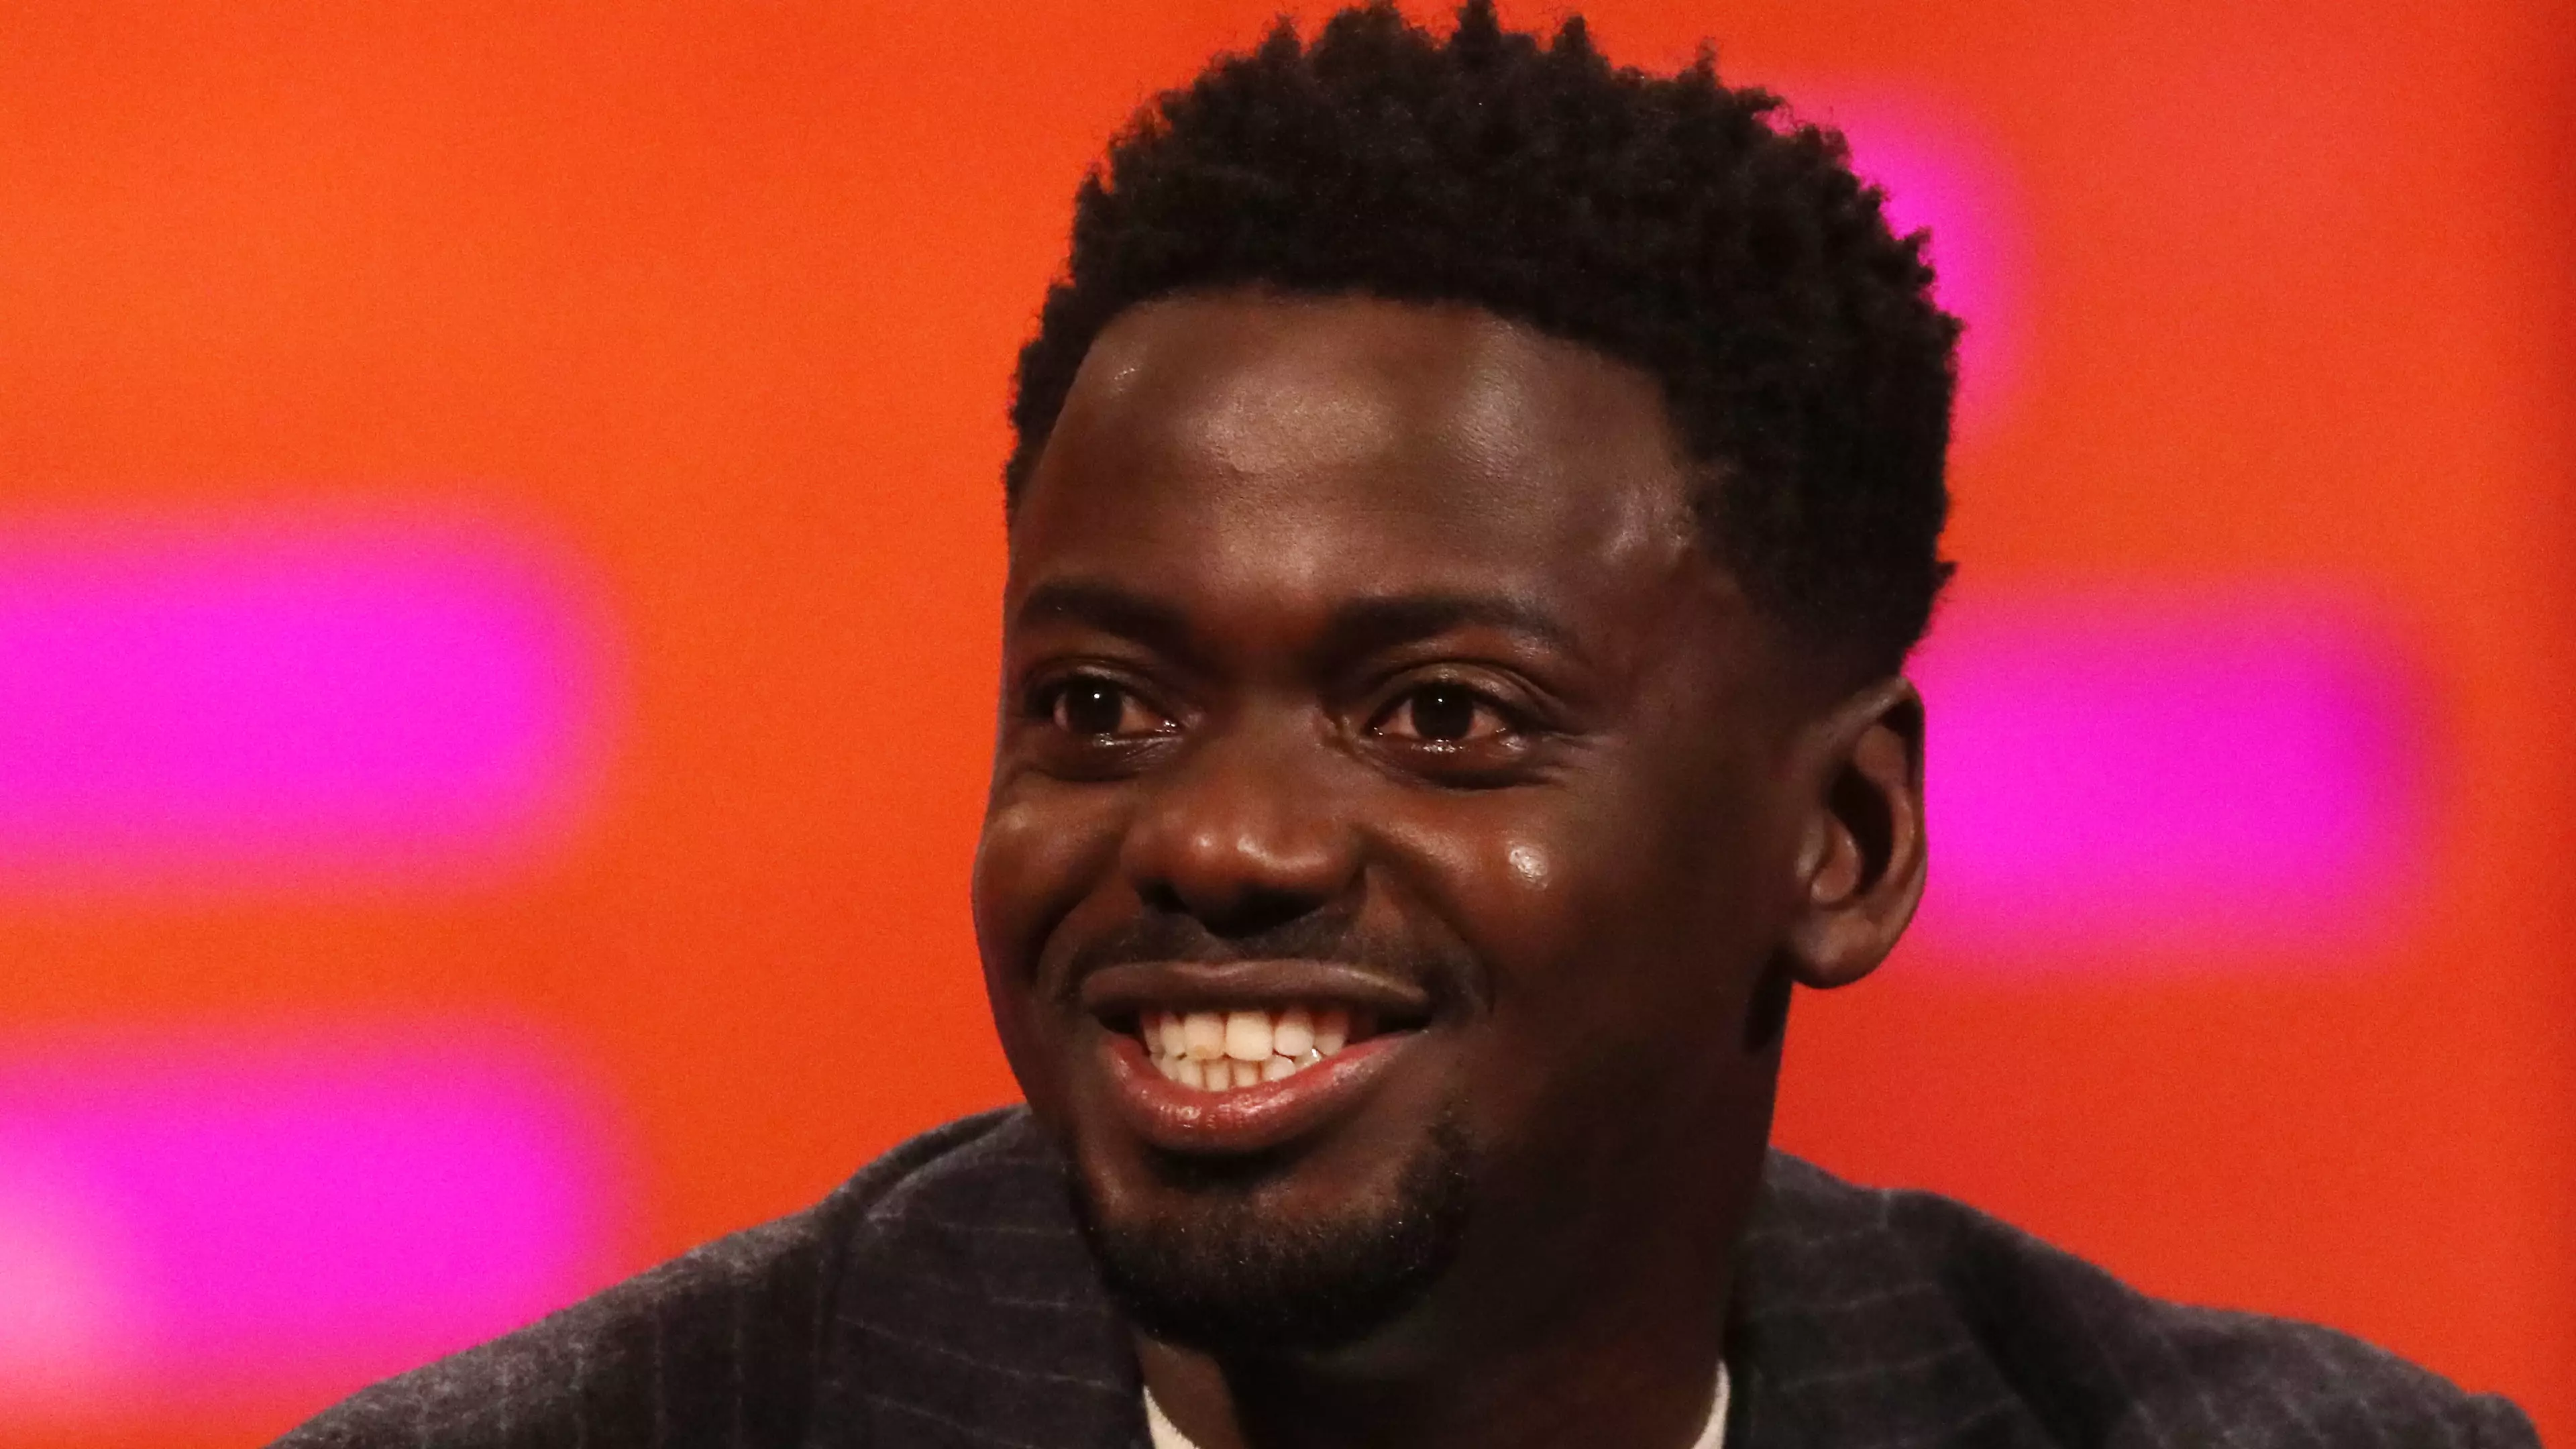 Daniel Kaluuya Confirms His Live-Action Barney Movie Is Happening And It'll Be Dark